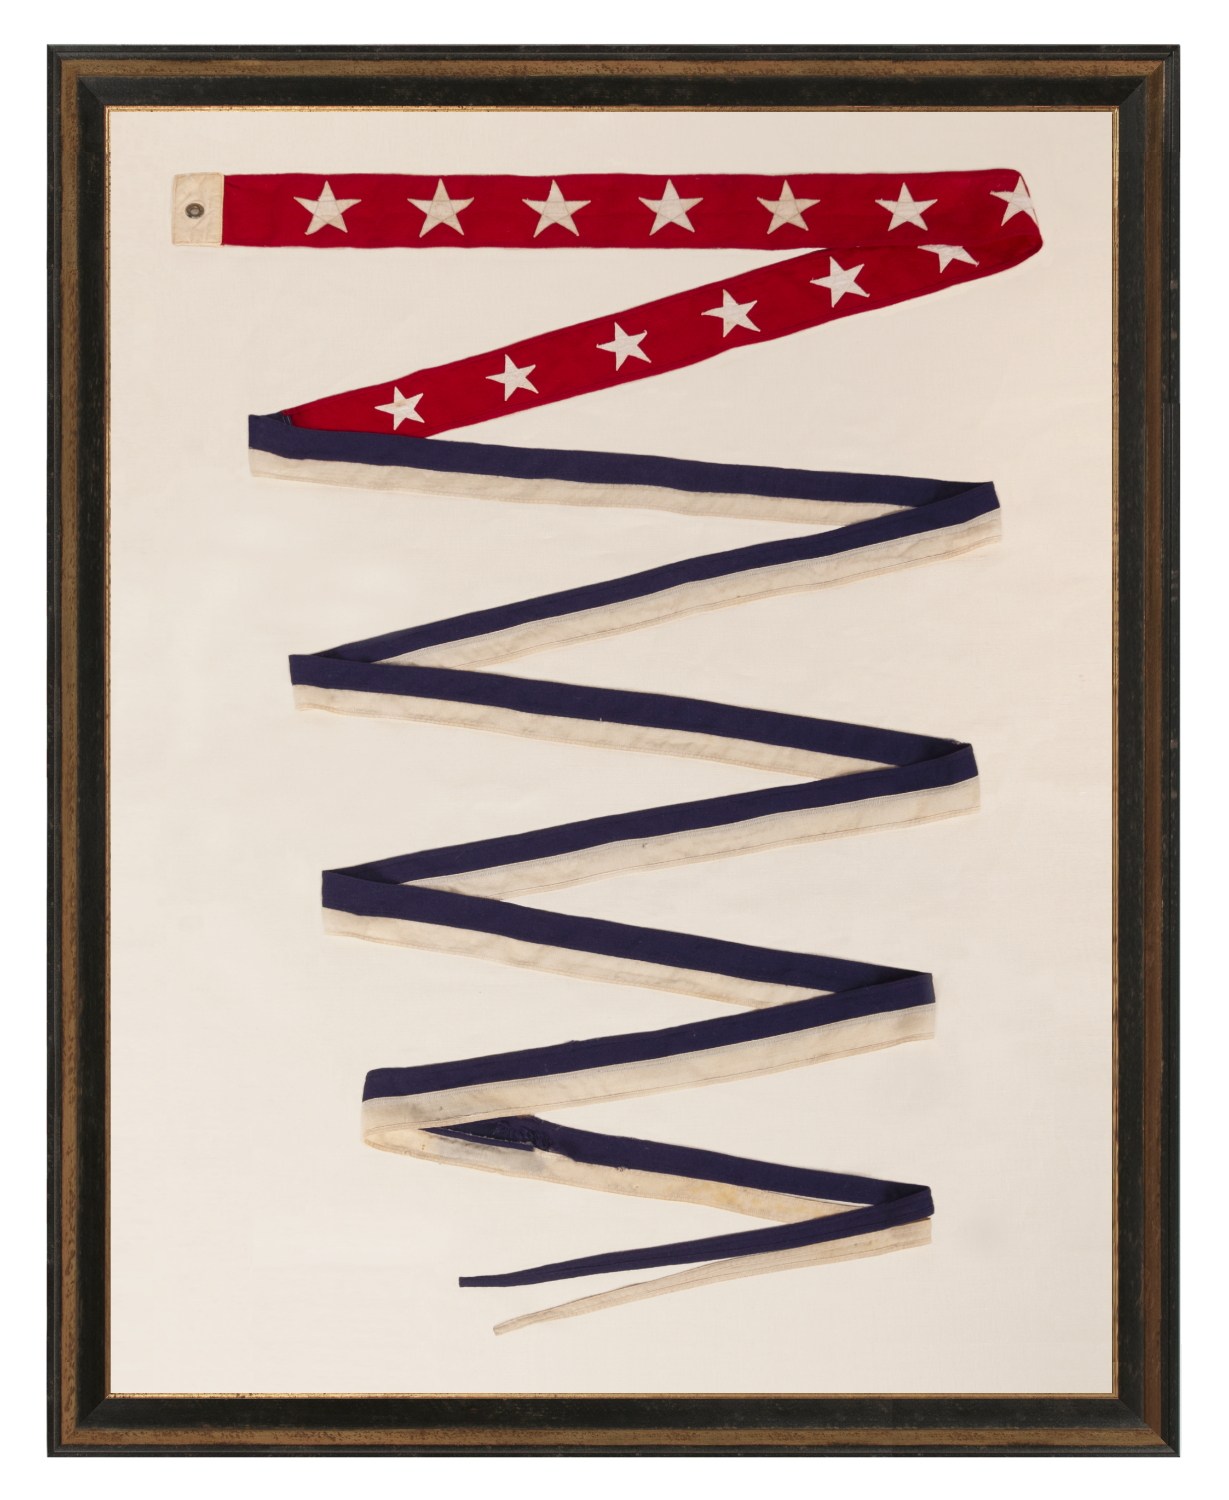 EXTREMELY RARE U.S. WAR DEPARTMENT COMMISSION PENNANT WITH 13 STARS, A REVERSAL OF THE U.S. NAVY COLOR SCHEME, 24 FEET ON THE FLY, SPANISH-AMERICAN WAR – WWI ERA (1898-1918) N THE FLY, SPANISH-AMERICAN WAR - WWI ERA (1898-1917)